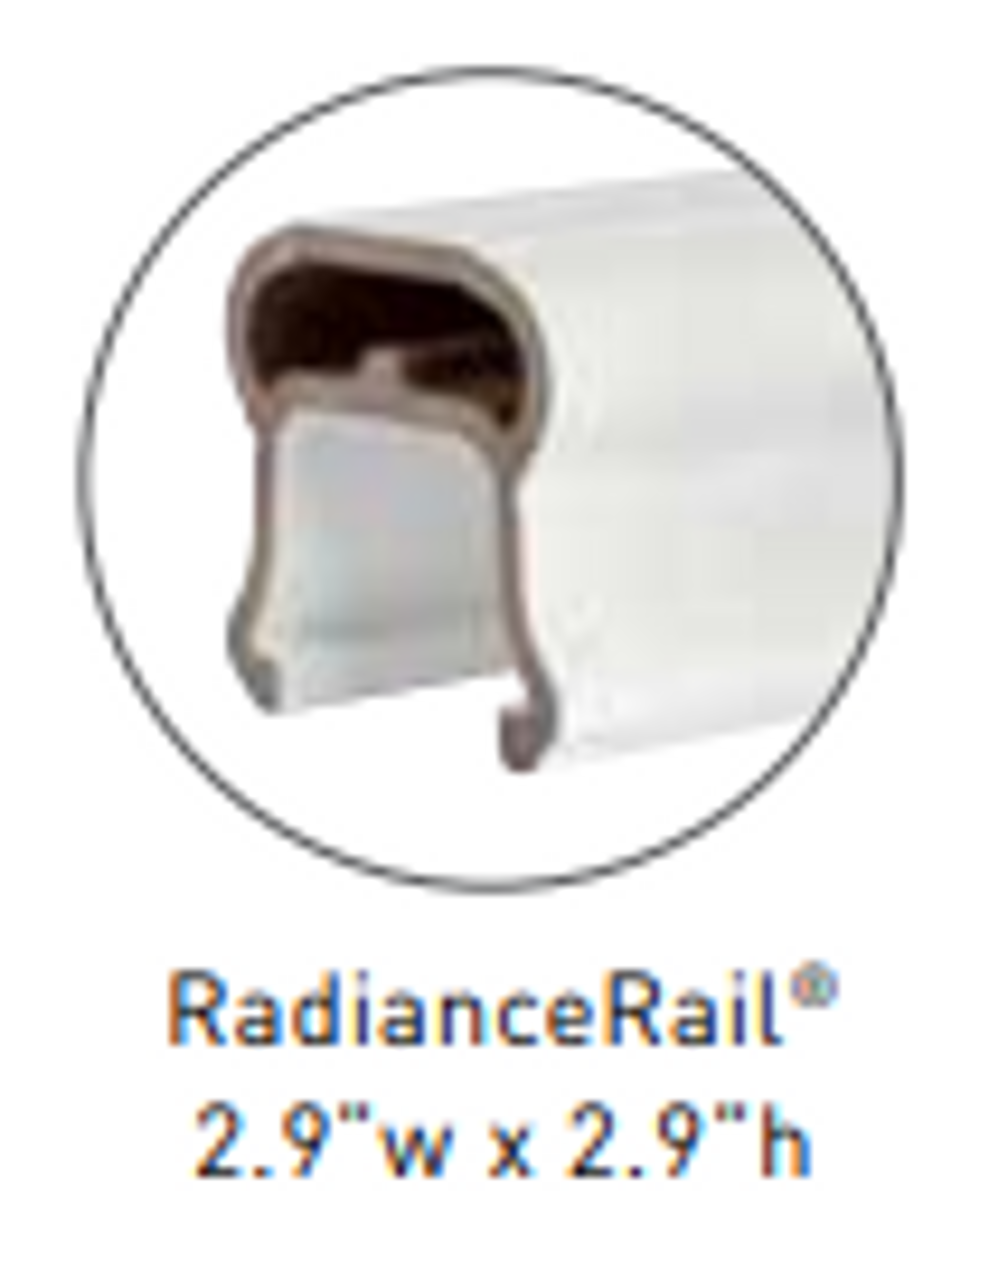 Compatible with Radiance Top Rail, SOLD SEPARATELY